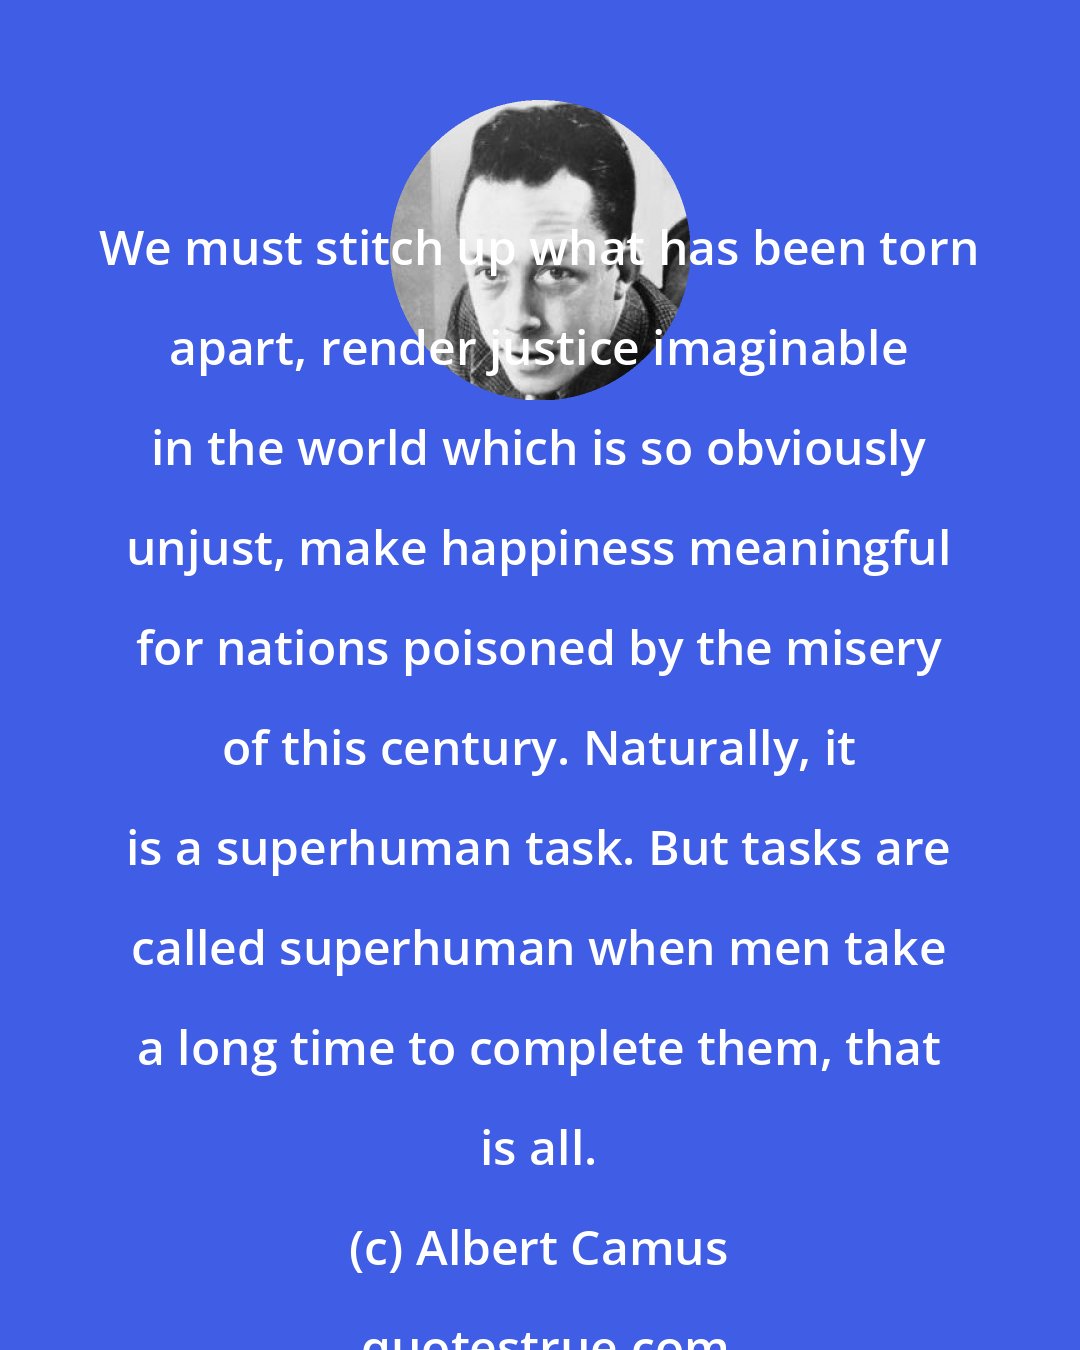 Albert Camus: We must stitch up what has been torn apart, render justice imaginable in the world which is so obviously unjust, make happiness meaningful for nations poisoned by the misery of this century. Naturally, it is a superhuman task. But tasks are called superhuman when men take a long time to complete them, that is all.